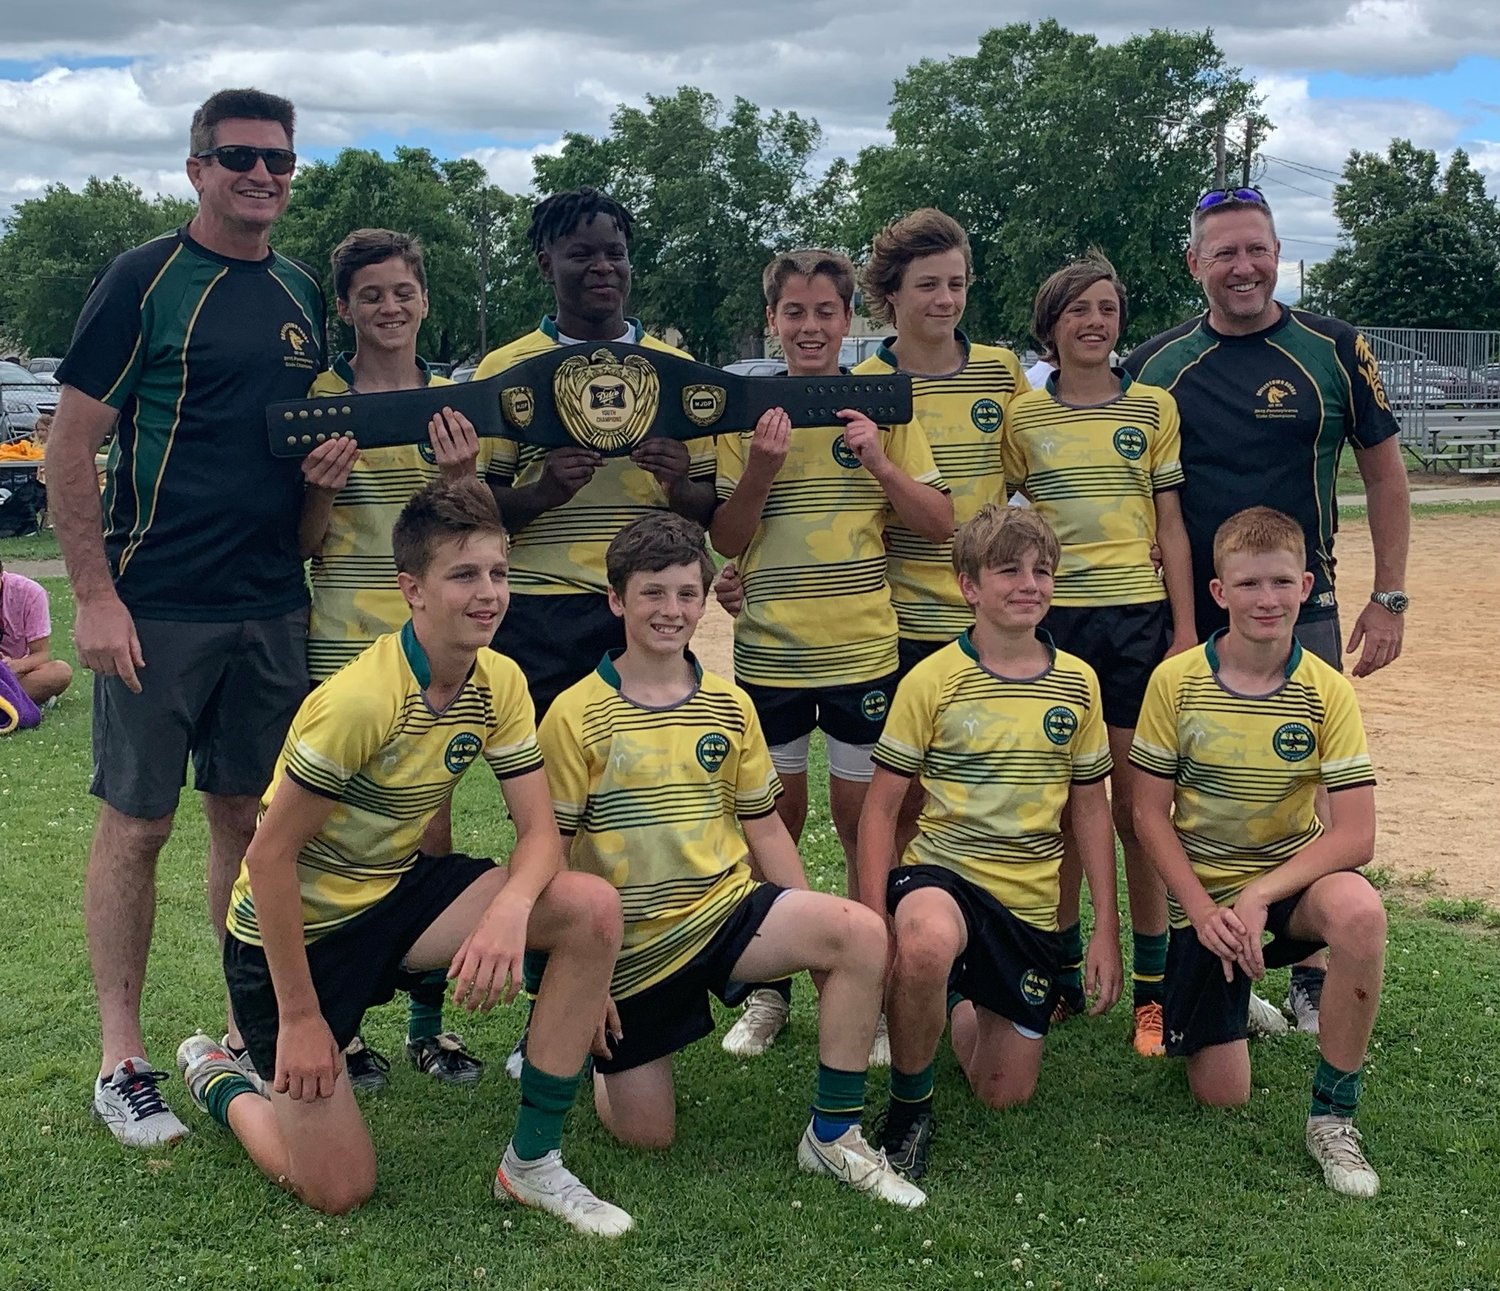 The Doylestown Rugby Academy youth team celebrates winning the Delco 7s Tournament on June 18. From left are: kneeling, Mason Darrows, Liam Hoey, Jackson Reilly, Sean Leuthe; standing, coach Kevin Reilly, Brady Meehan, Gavin Graham, Nick Miletto, Davis Parisi, Jamie Weir and coach Mark Weir.